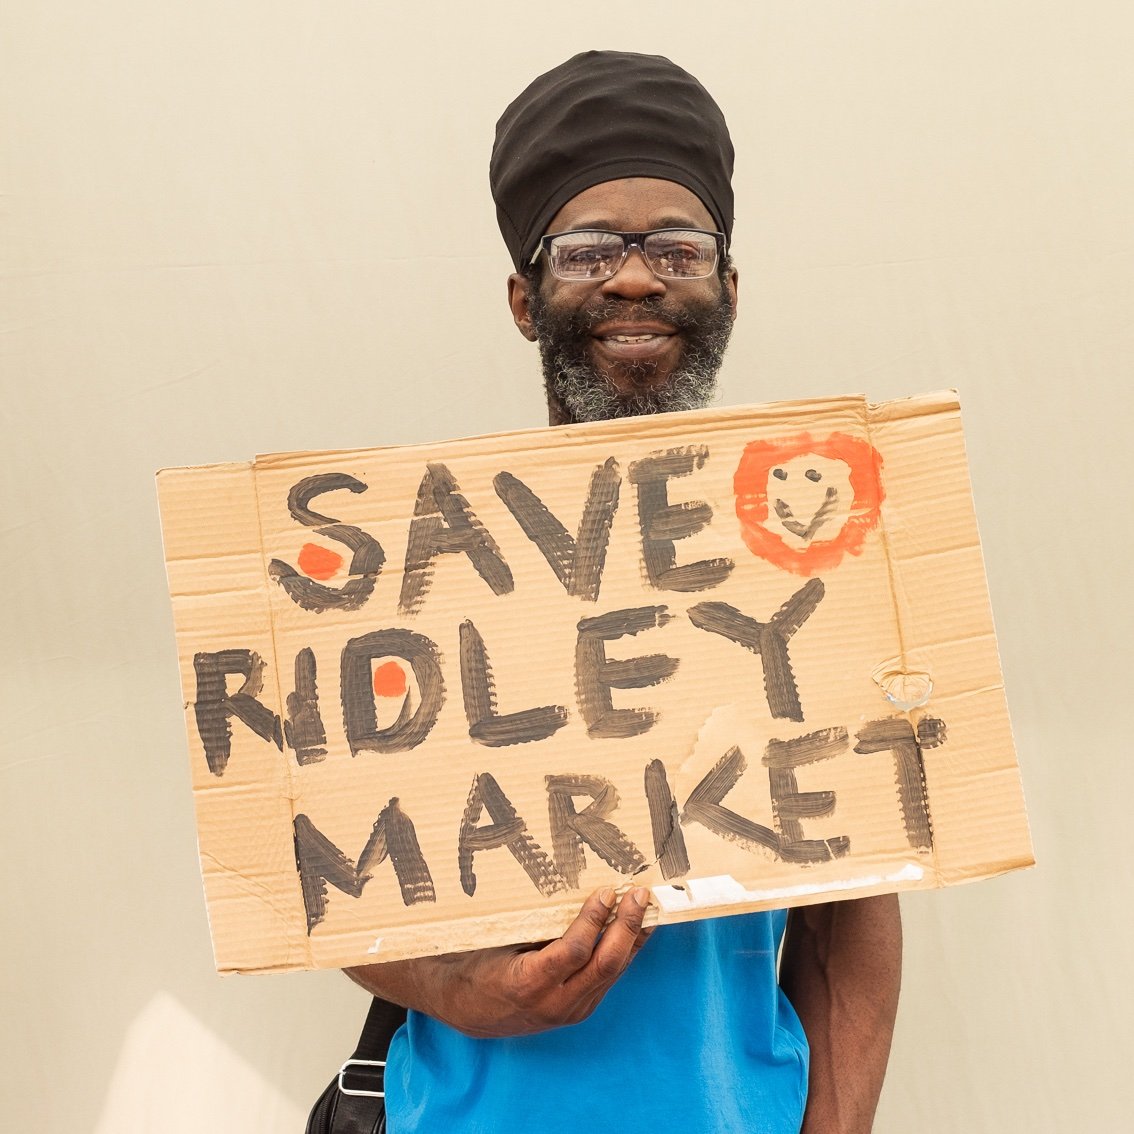 Ridley Road Market is the beating heart of Dalston. No more gentrification! No more Social Cleansing! Our market nourishes our community. Follow our Instagram!